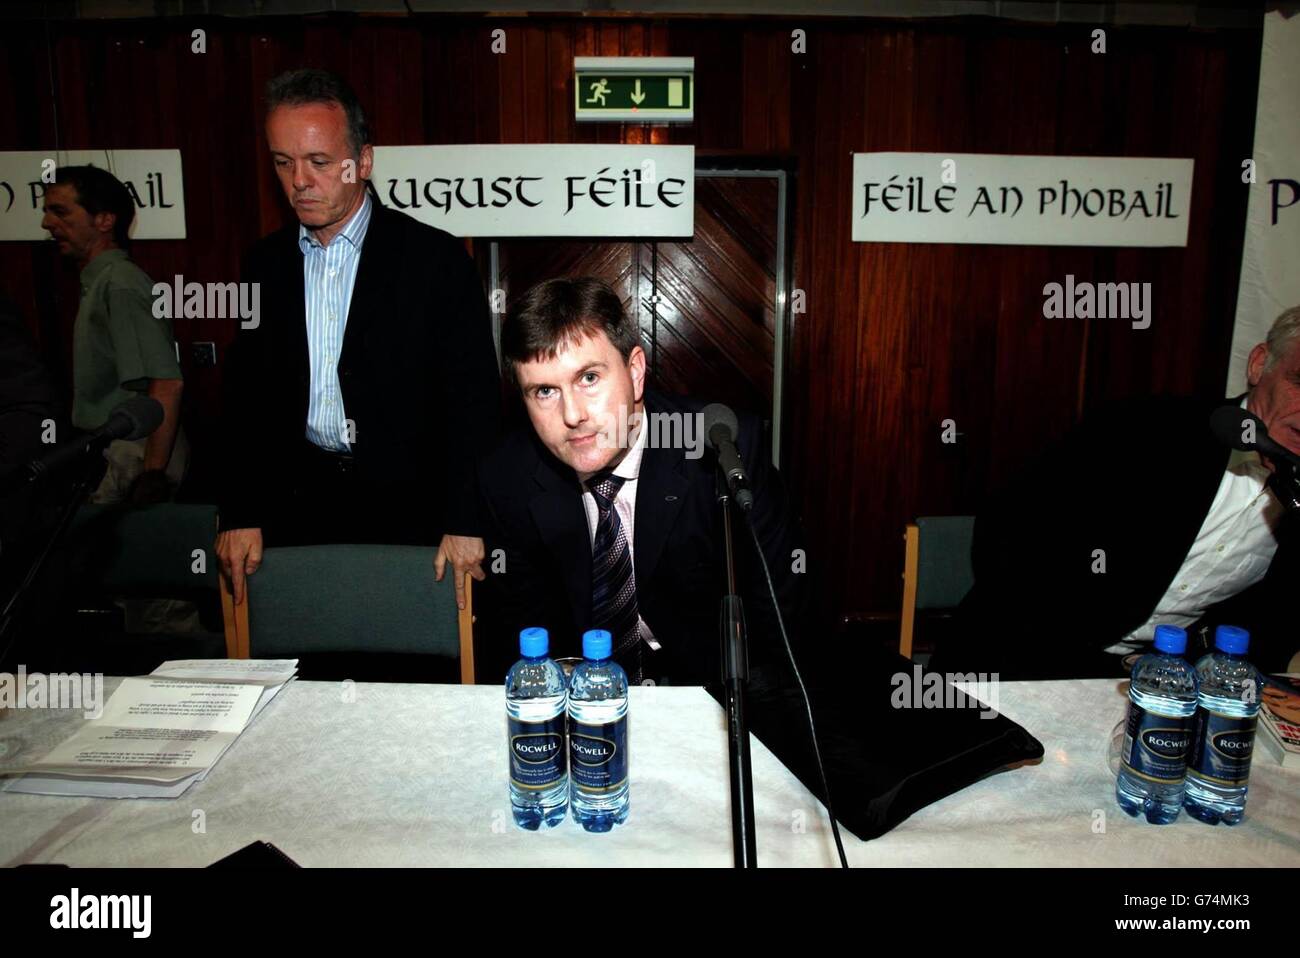 Democratic Unionist Party member Jeffrey Donaldson (centre) fields questions during a Talkback session in St Louise's Comprehensive School on the Falls road in Belfast. Donaldson was on a panel with Sinn Fein MEP Mary Lou McDonald, George Galloway and Eamon Dunphy. Stock Photo